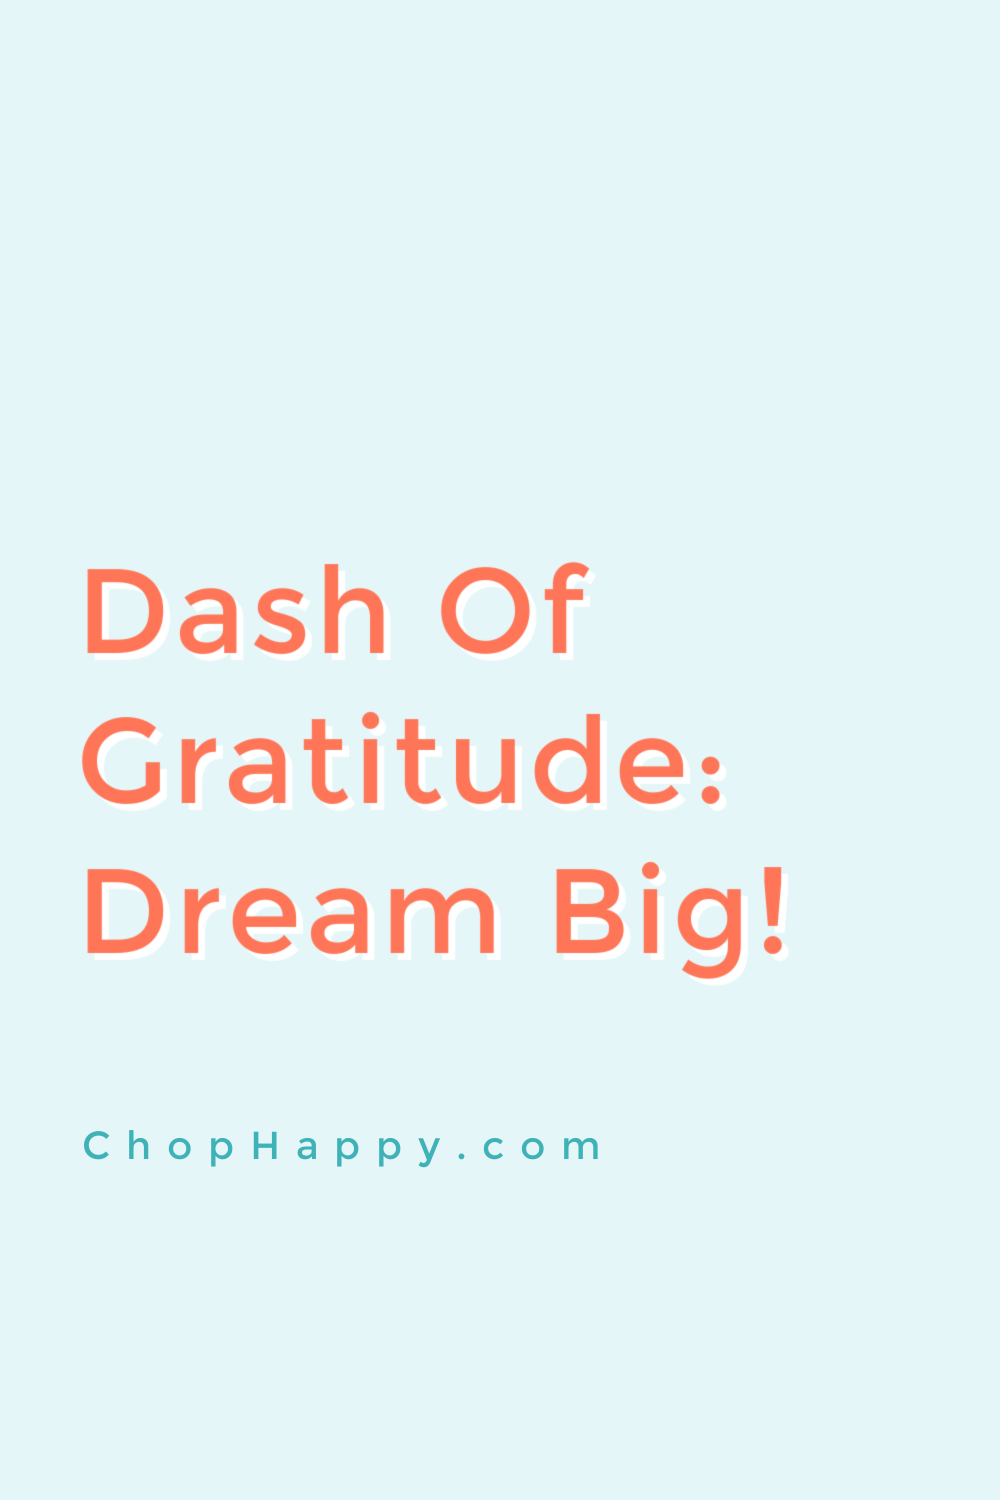 Dash of Gratitude: Dream Big!  Set your goals higher then you think! This will help you  achieve more then you ever thought possible! Grateful for you! www.ChopHappy.com #attitudeofgratitude #goals